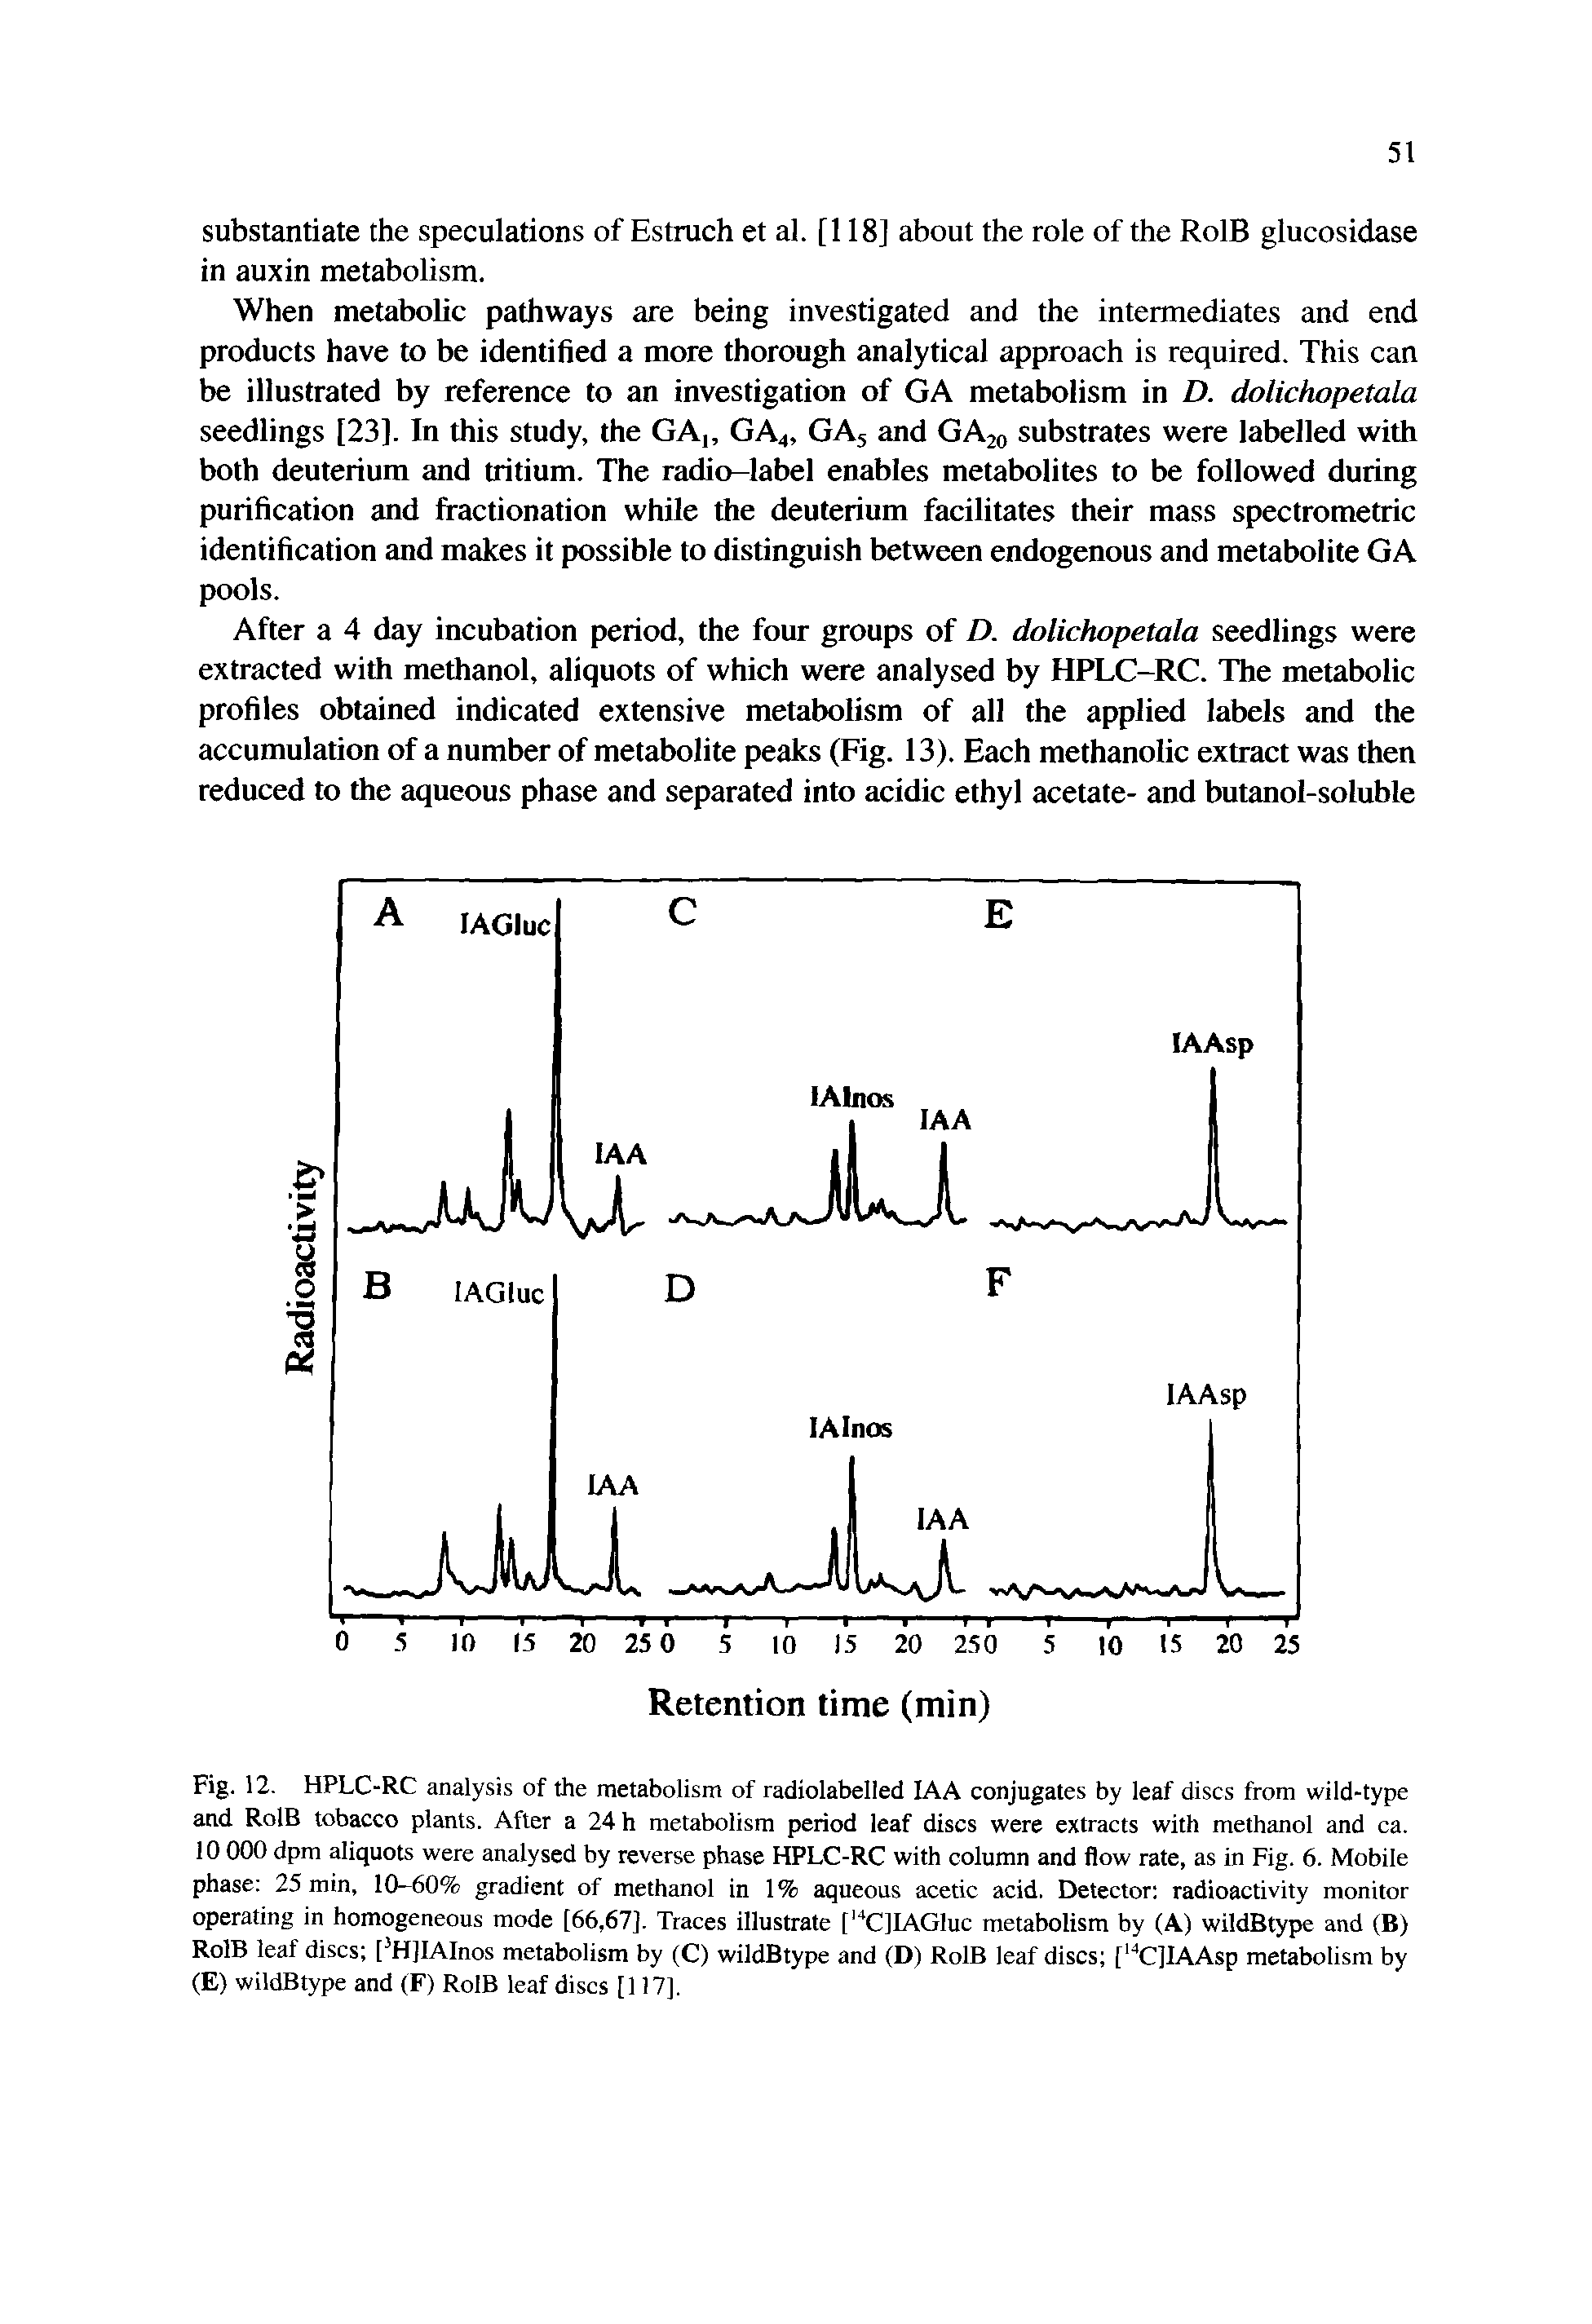 Fig. 12. HPLC-RC analysis of the metabolism of radiolabelled lAA conjugates by leaf discs from wild-type and RolB tobacco plants. After a 24 h metabolism period leaf discs were extracts with methanol and ca. 10 000 dpm aliquots were analysed by reverse phase HPLC-RC with column and flow rate, as in Fig. 6. Mobile phase 25 min, 10-60% gradient of methanol in 1% aqueous acetic acid. Detector radioactivity monitor operating in homogeneous mode [66,67]. Traces illustrate [ CJIAGluc metabolism by (A) wildBtype and (B) RolB leaf discs [ HJlAInos metabolism by (C) wildBtype and (D) RolB leaf discs [ C]IAAsp metabolism by (E) wildBtype and (F) RolB leaf discs [117],...